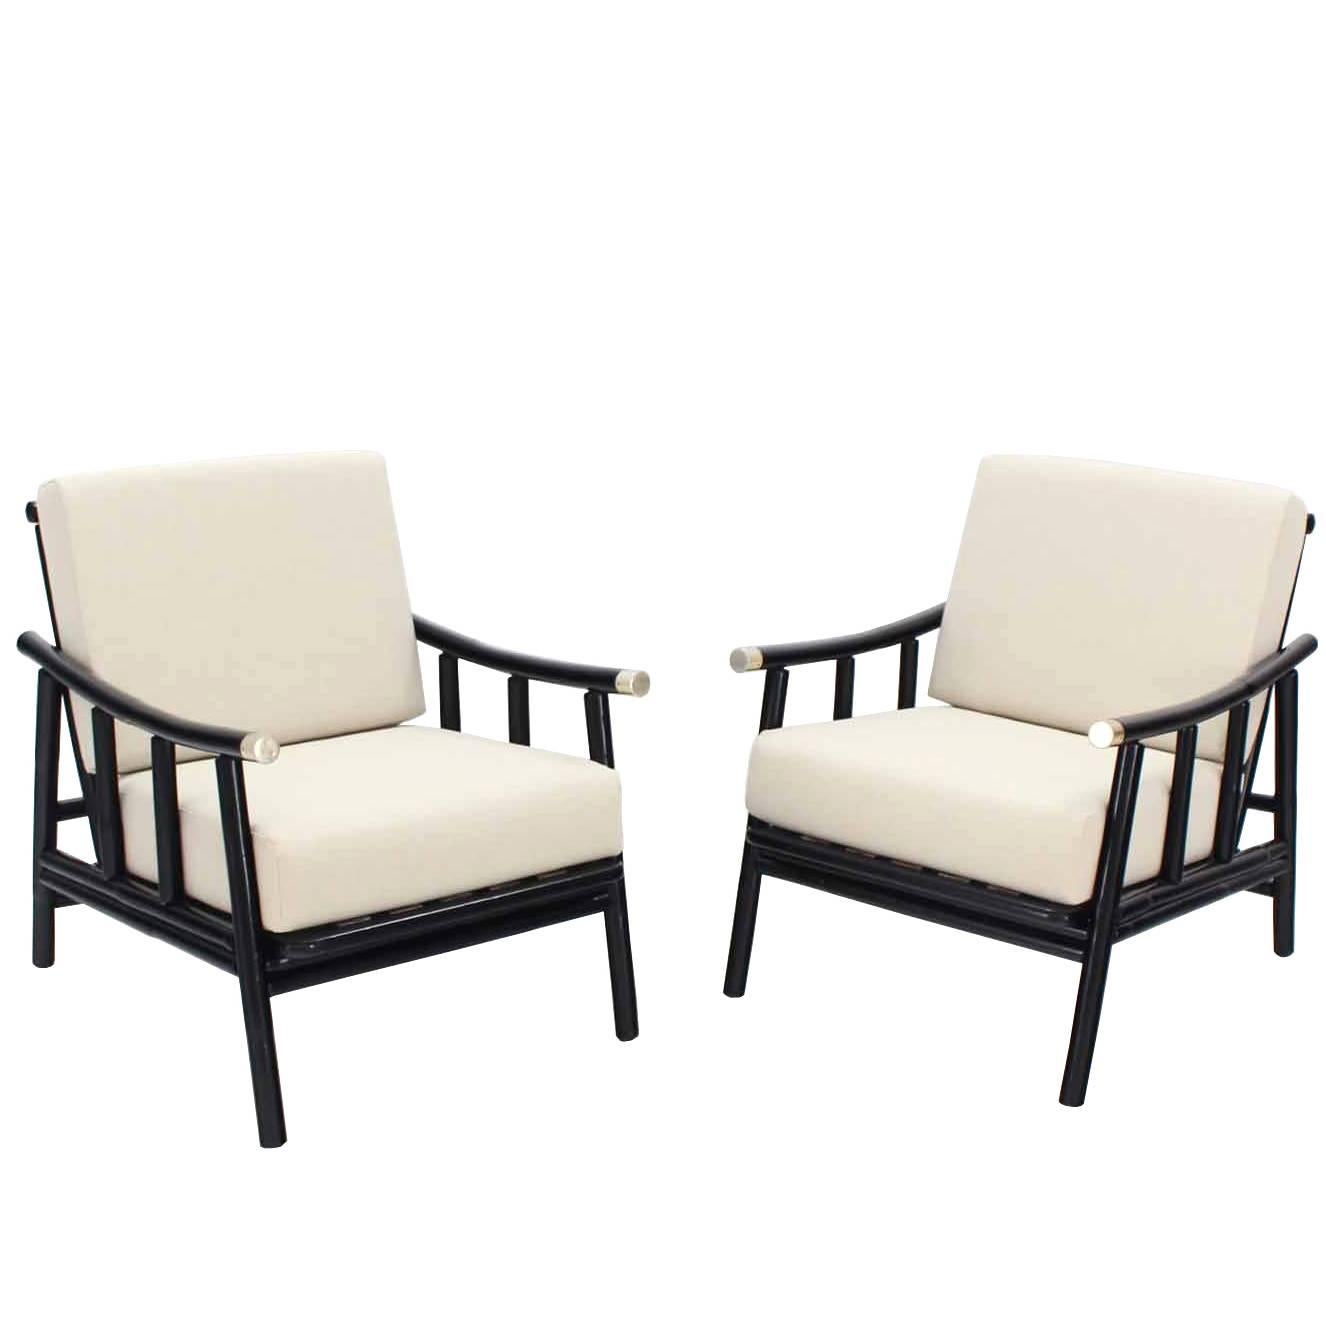 Pair of Faux Bamboo Lounge Chairs New Upholstery